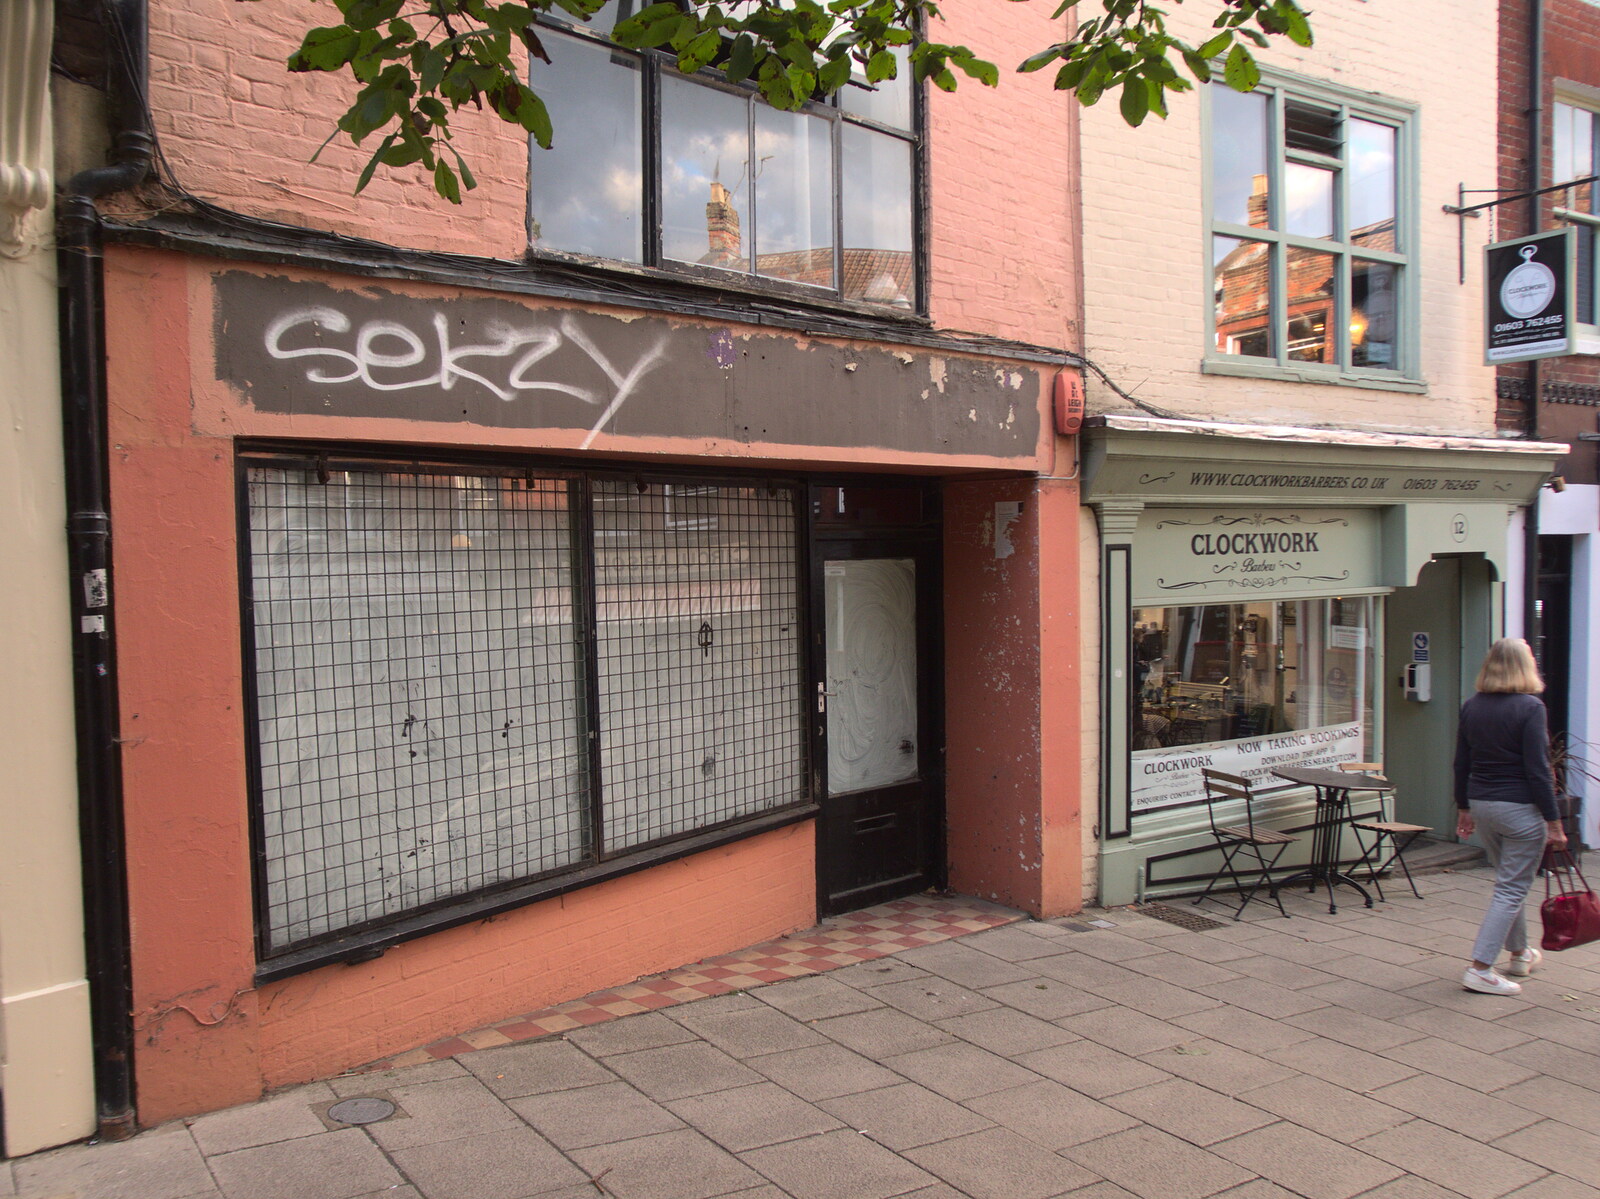 A closed-down shop has been sprayed 'Sekzy' from BSCC at Ampersand and Birthday Lego at Jarrold's, Norwich, Norfolk - 25th September 2021